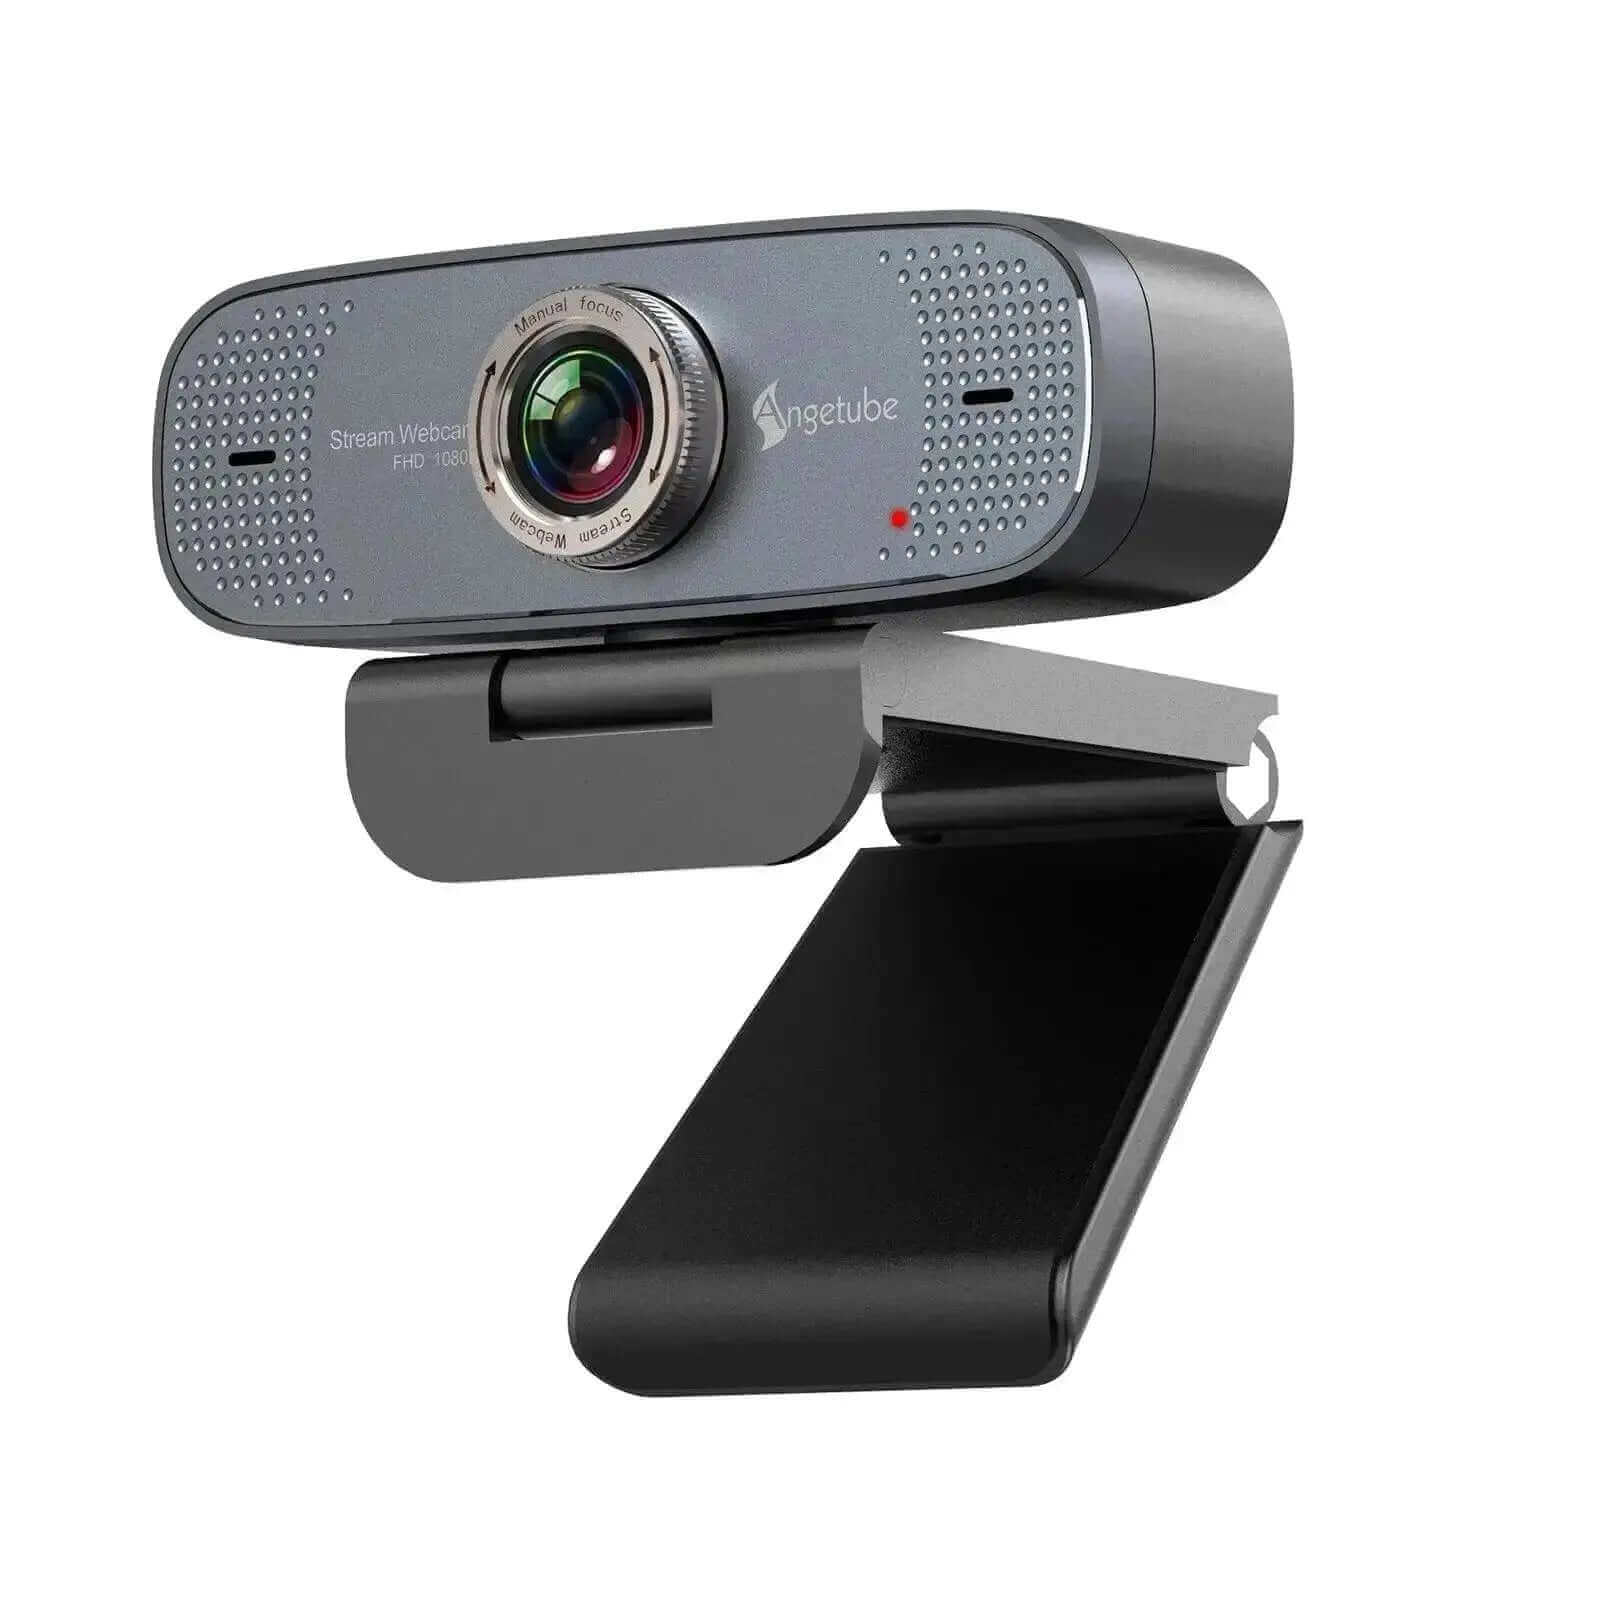 Webcam 1080P@60pfs/30fps immersive streaming experience